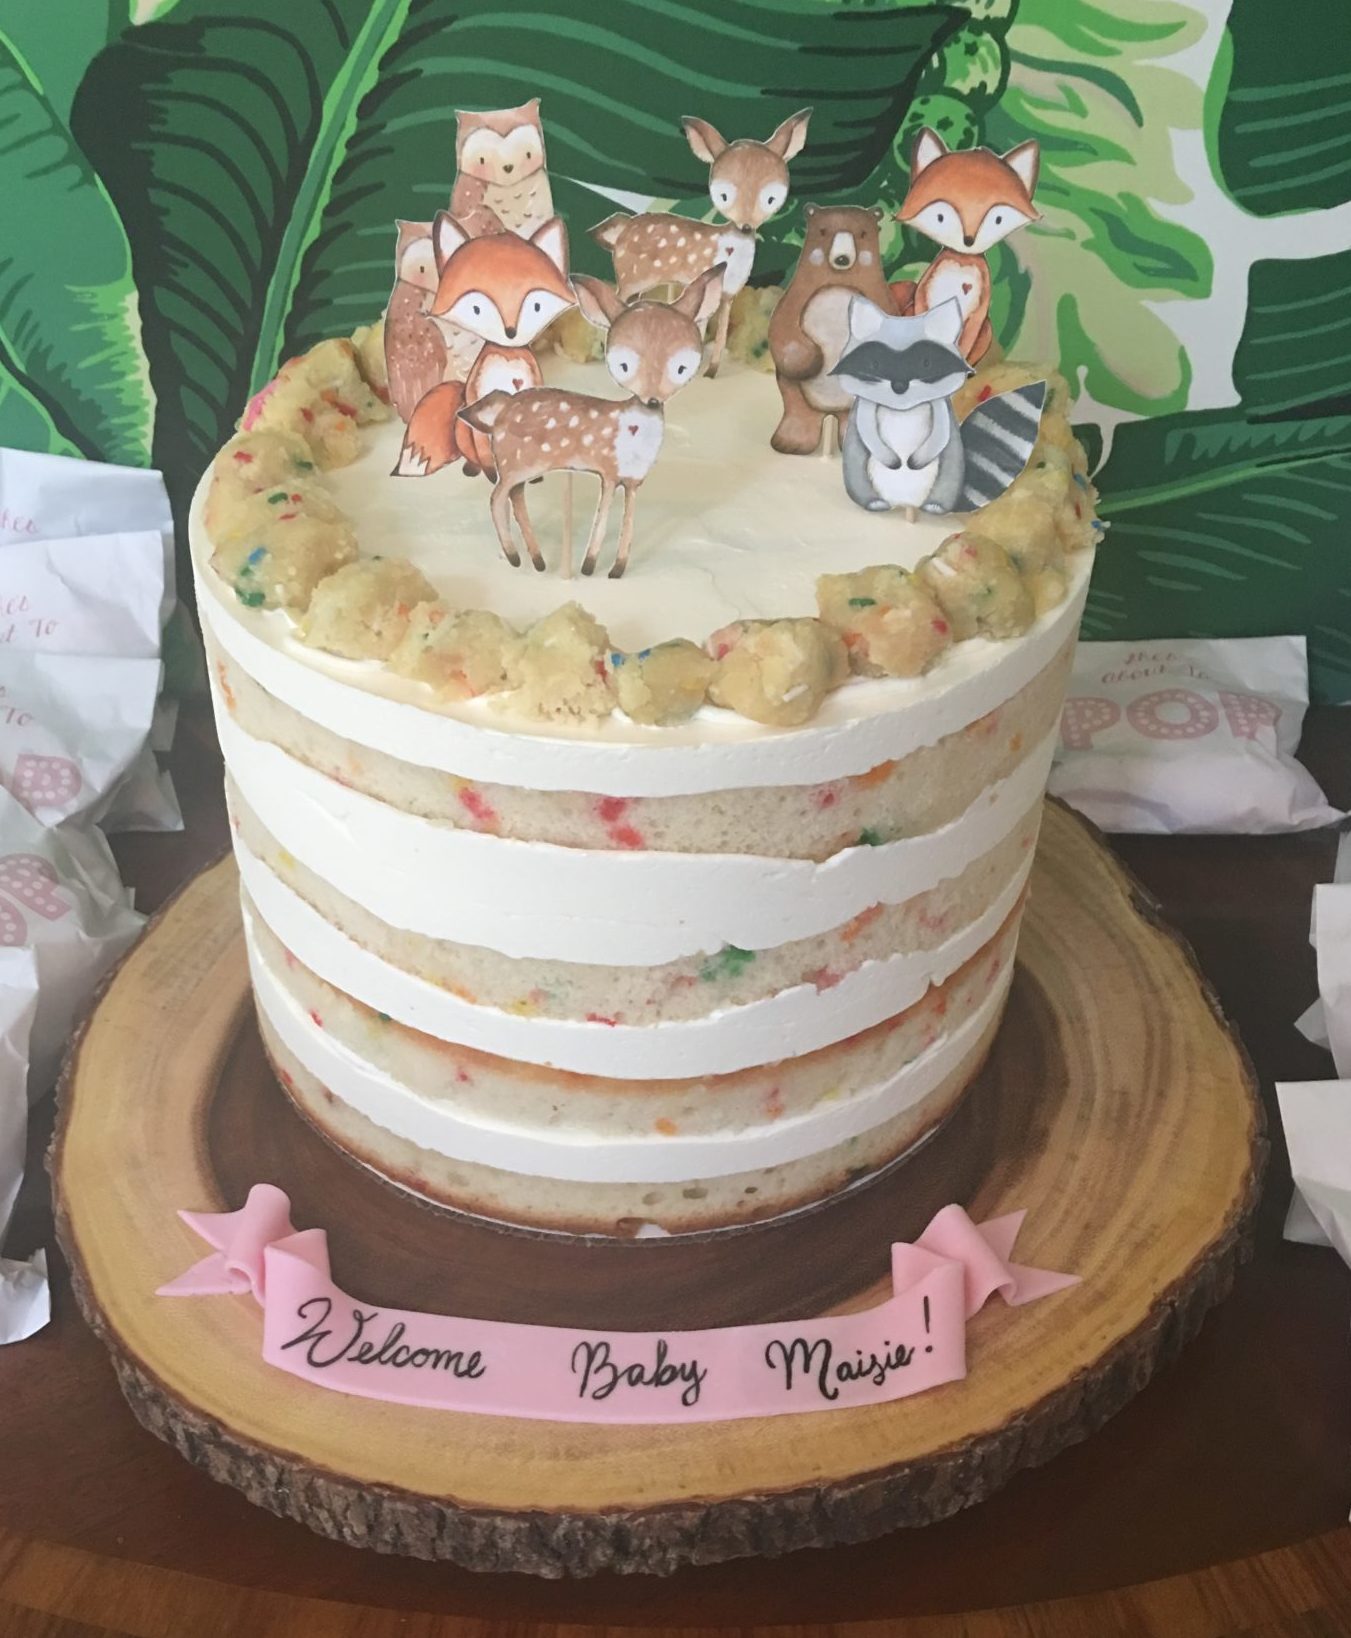 Funfetti cake with animal toppers